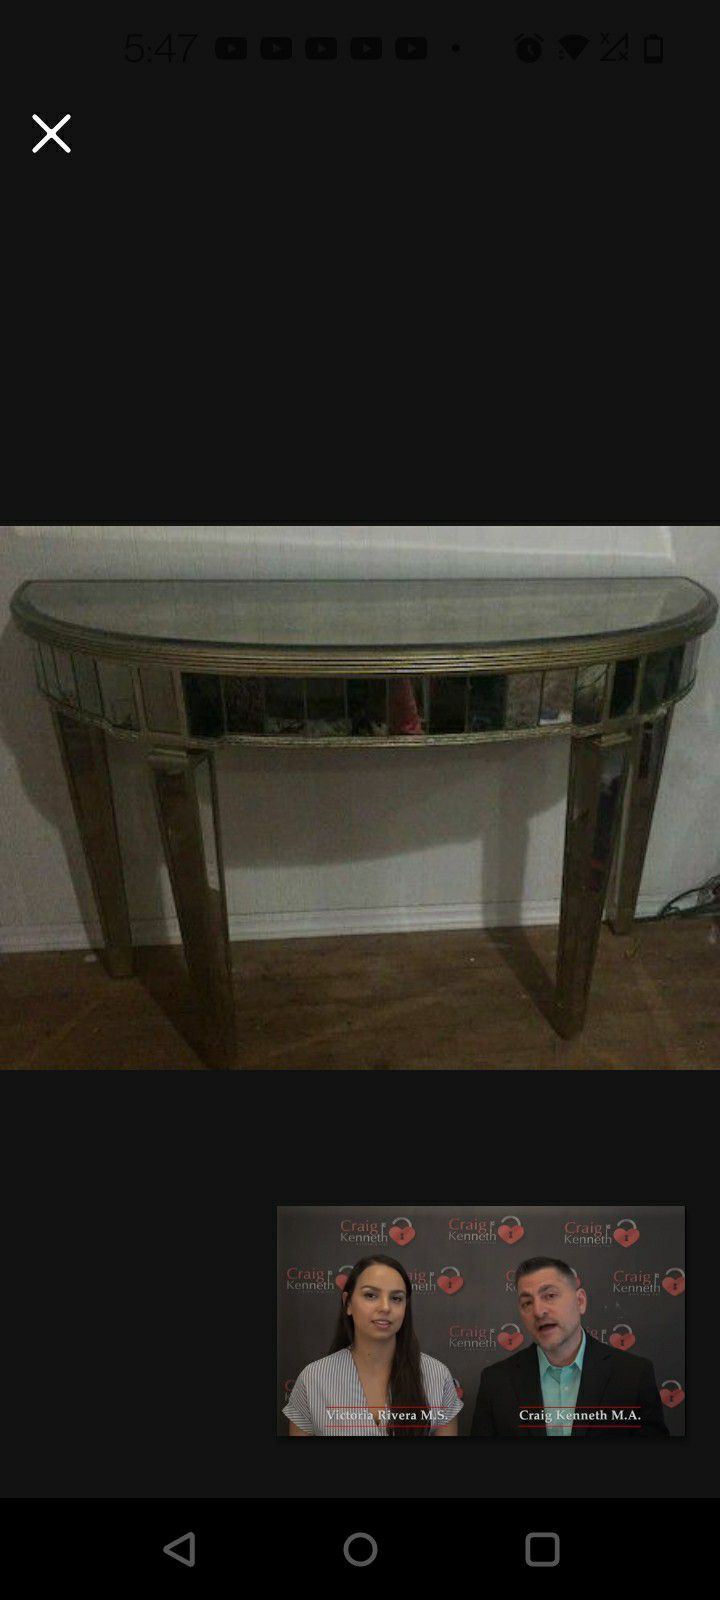 Z Gallerie Mirrored Console Table 